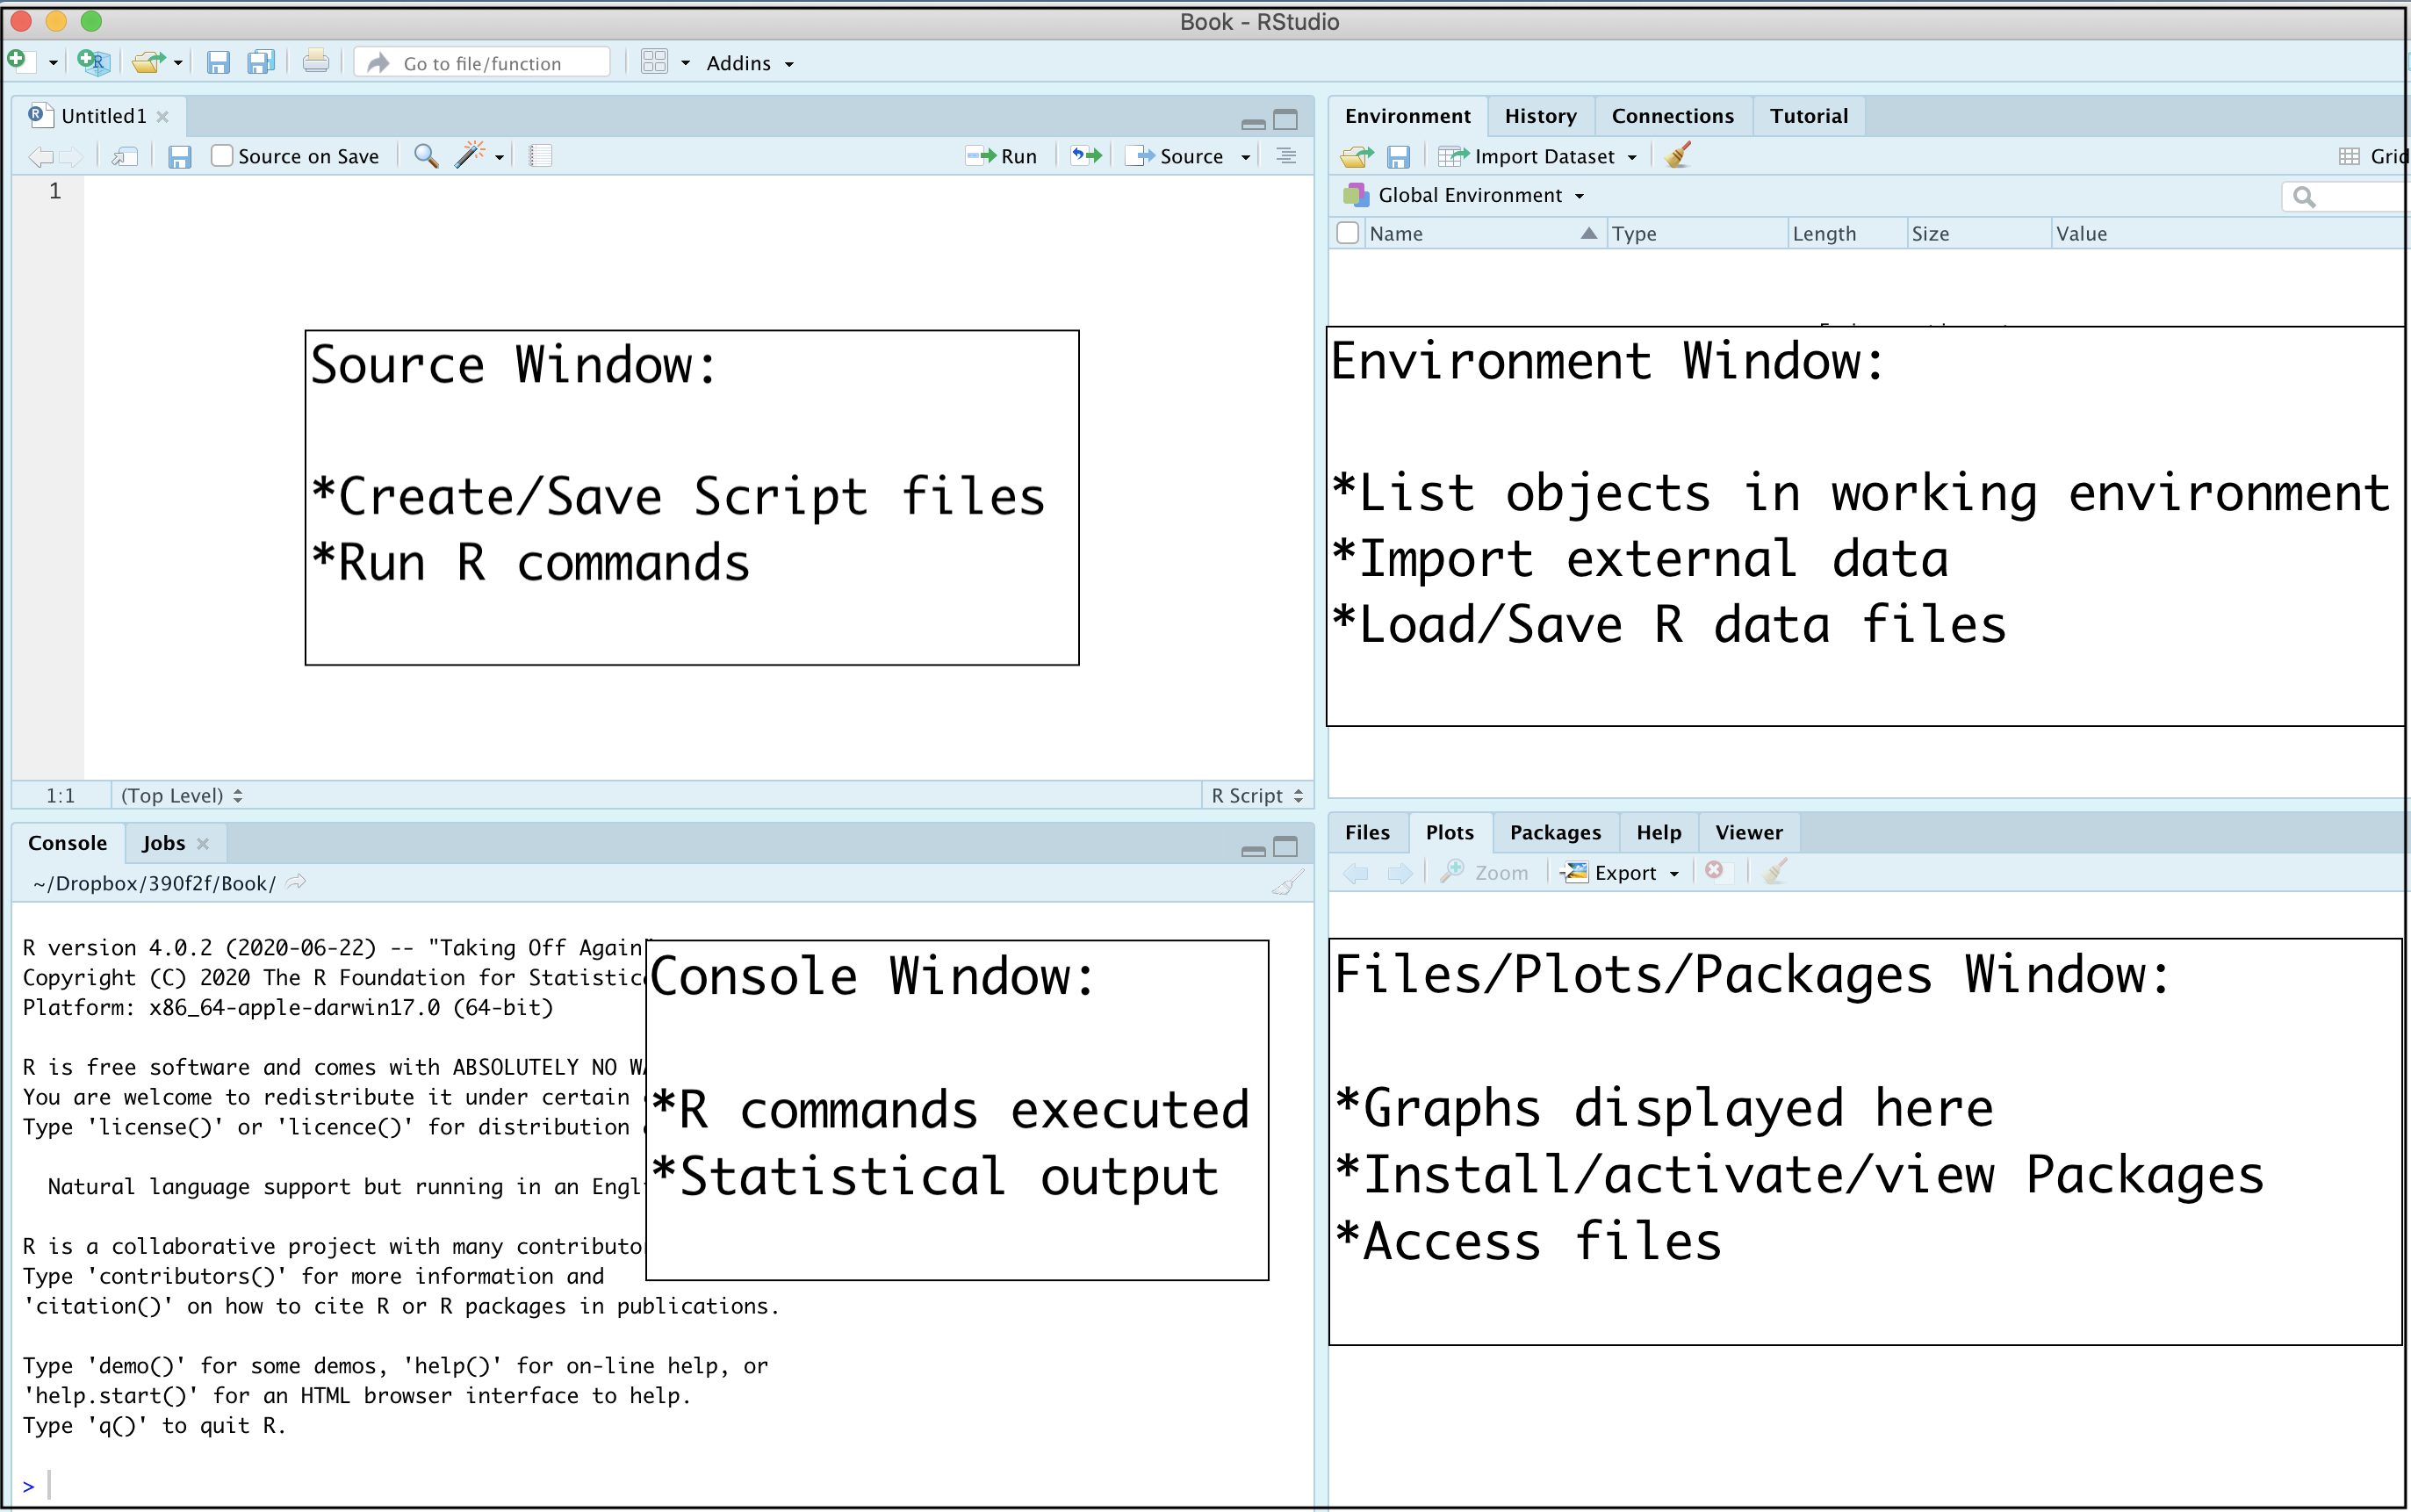 An Annotated Display of RStudio Windows